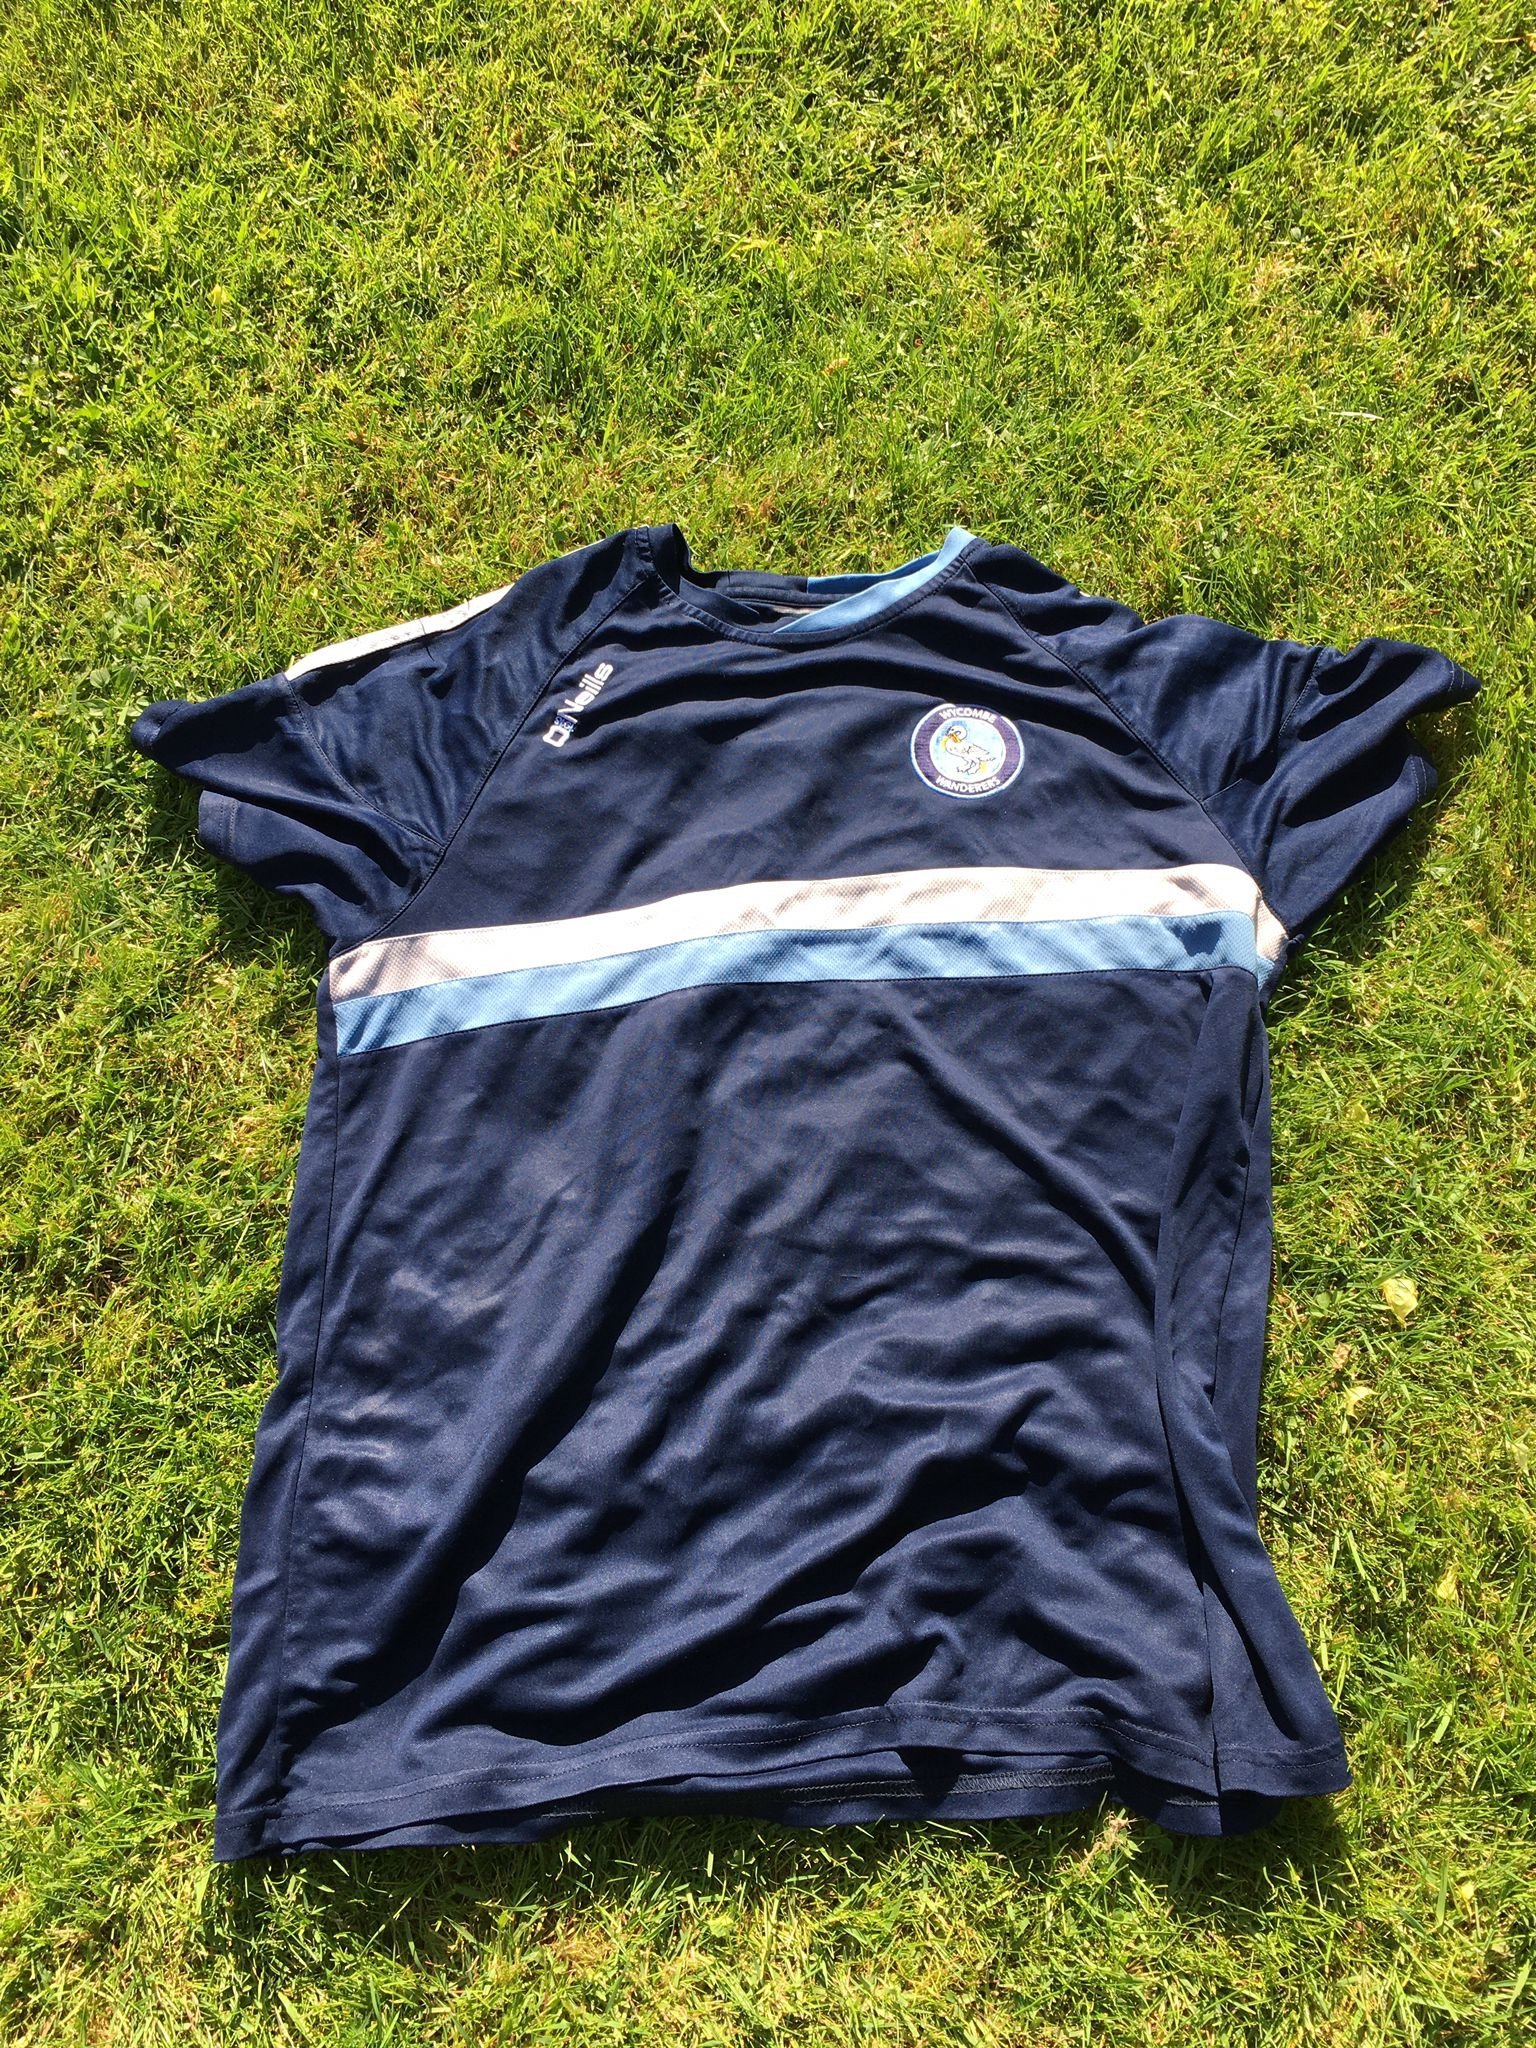 One of the training shirts